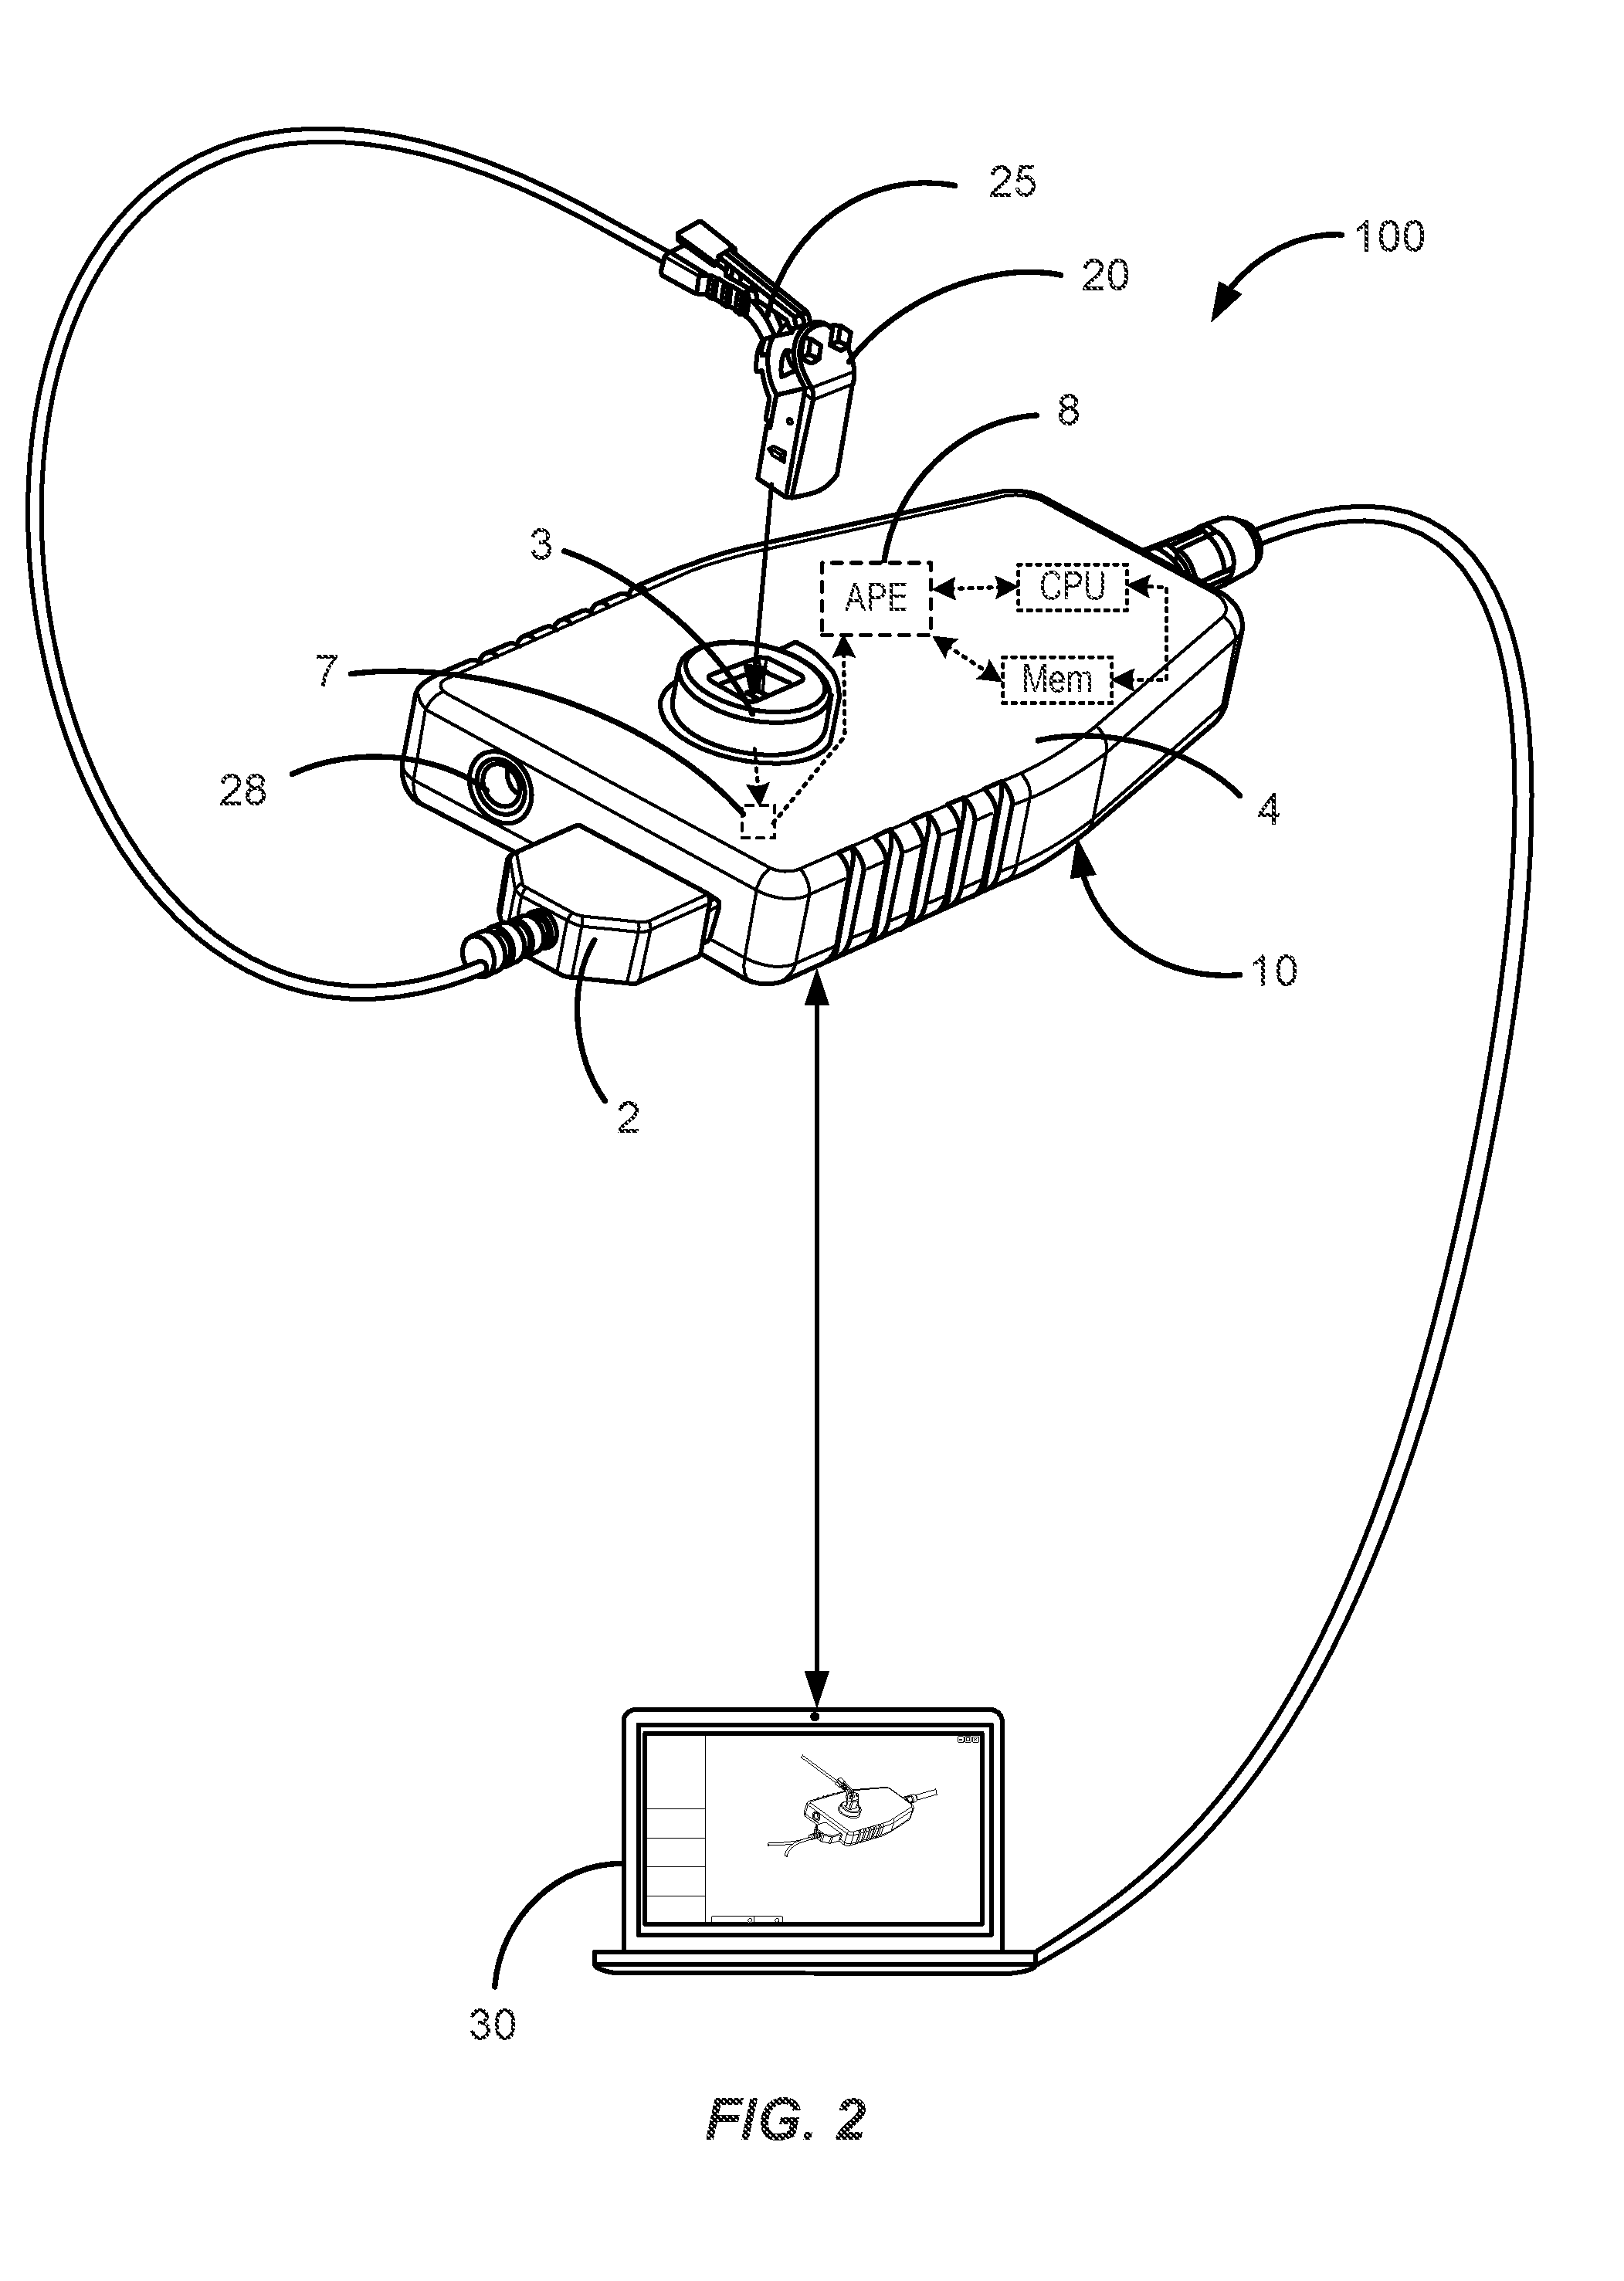 Hearing device test system for non-expert user at home and non-clinical settings